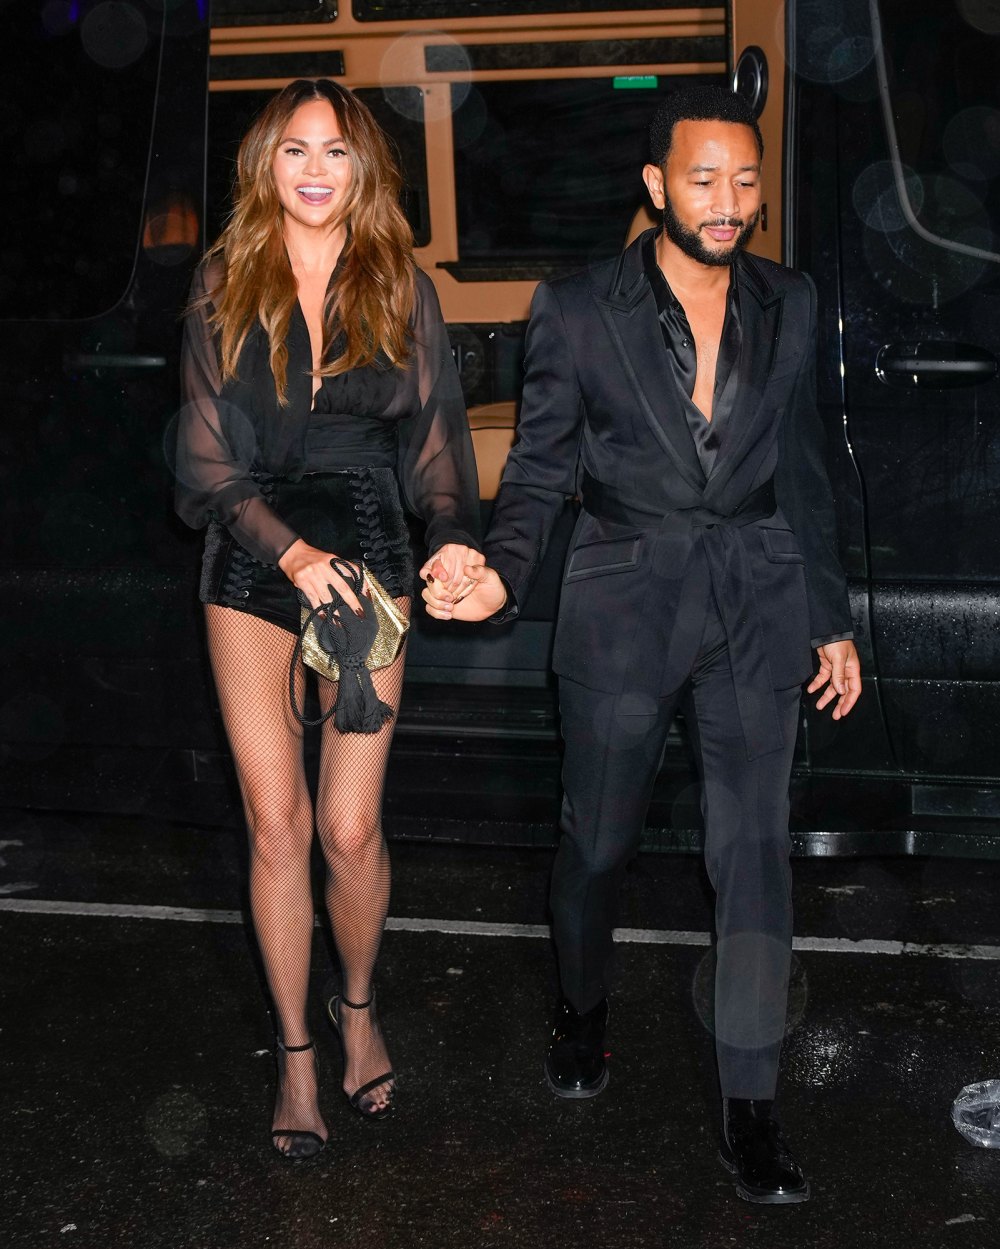 Chrissy Teigen and John Legend out in NYC for John's Birthday